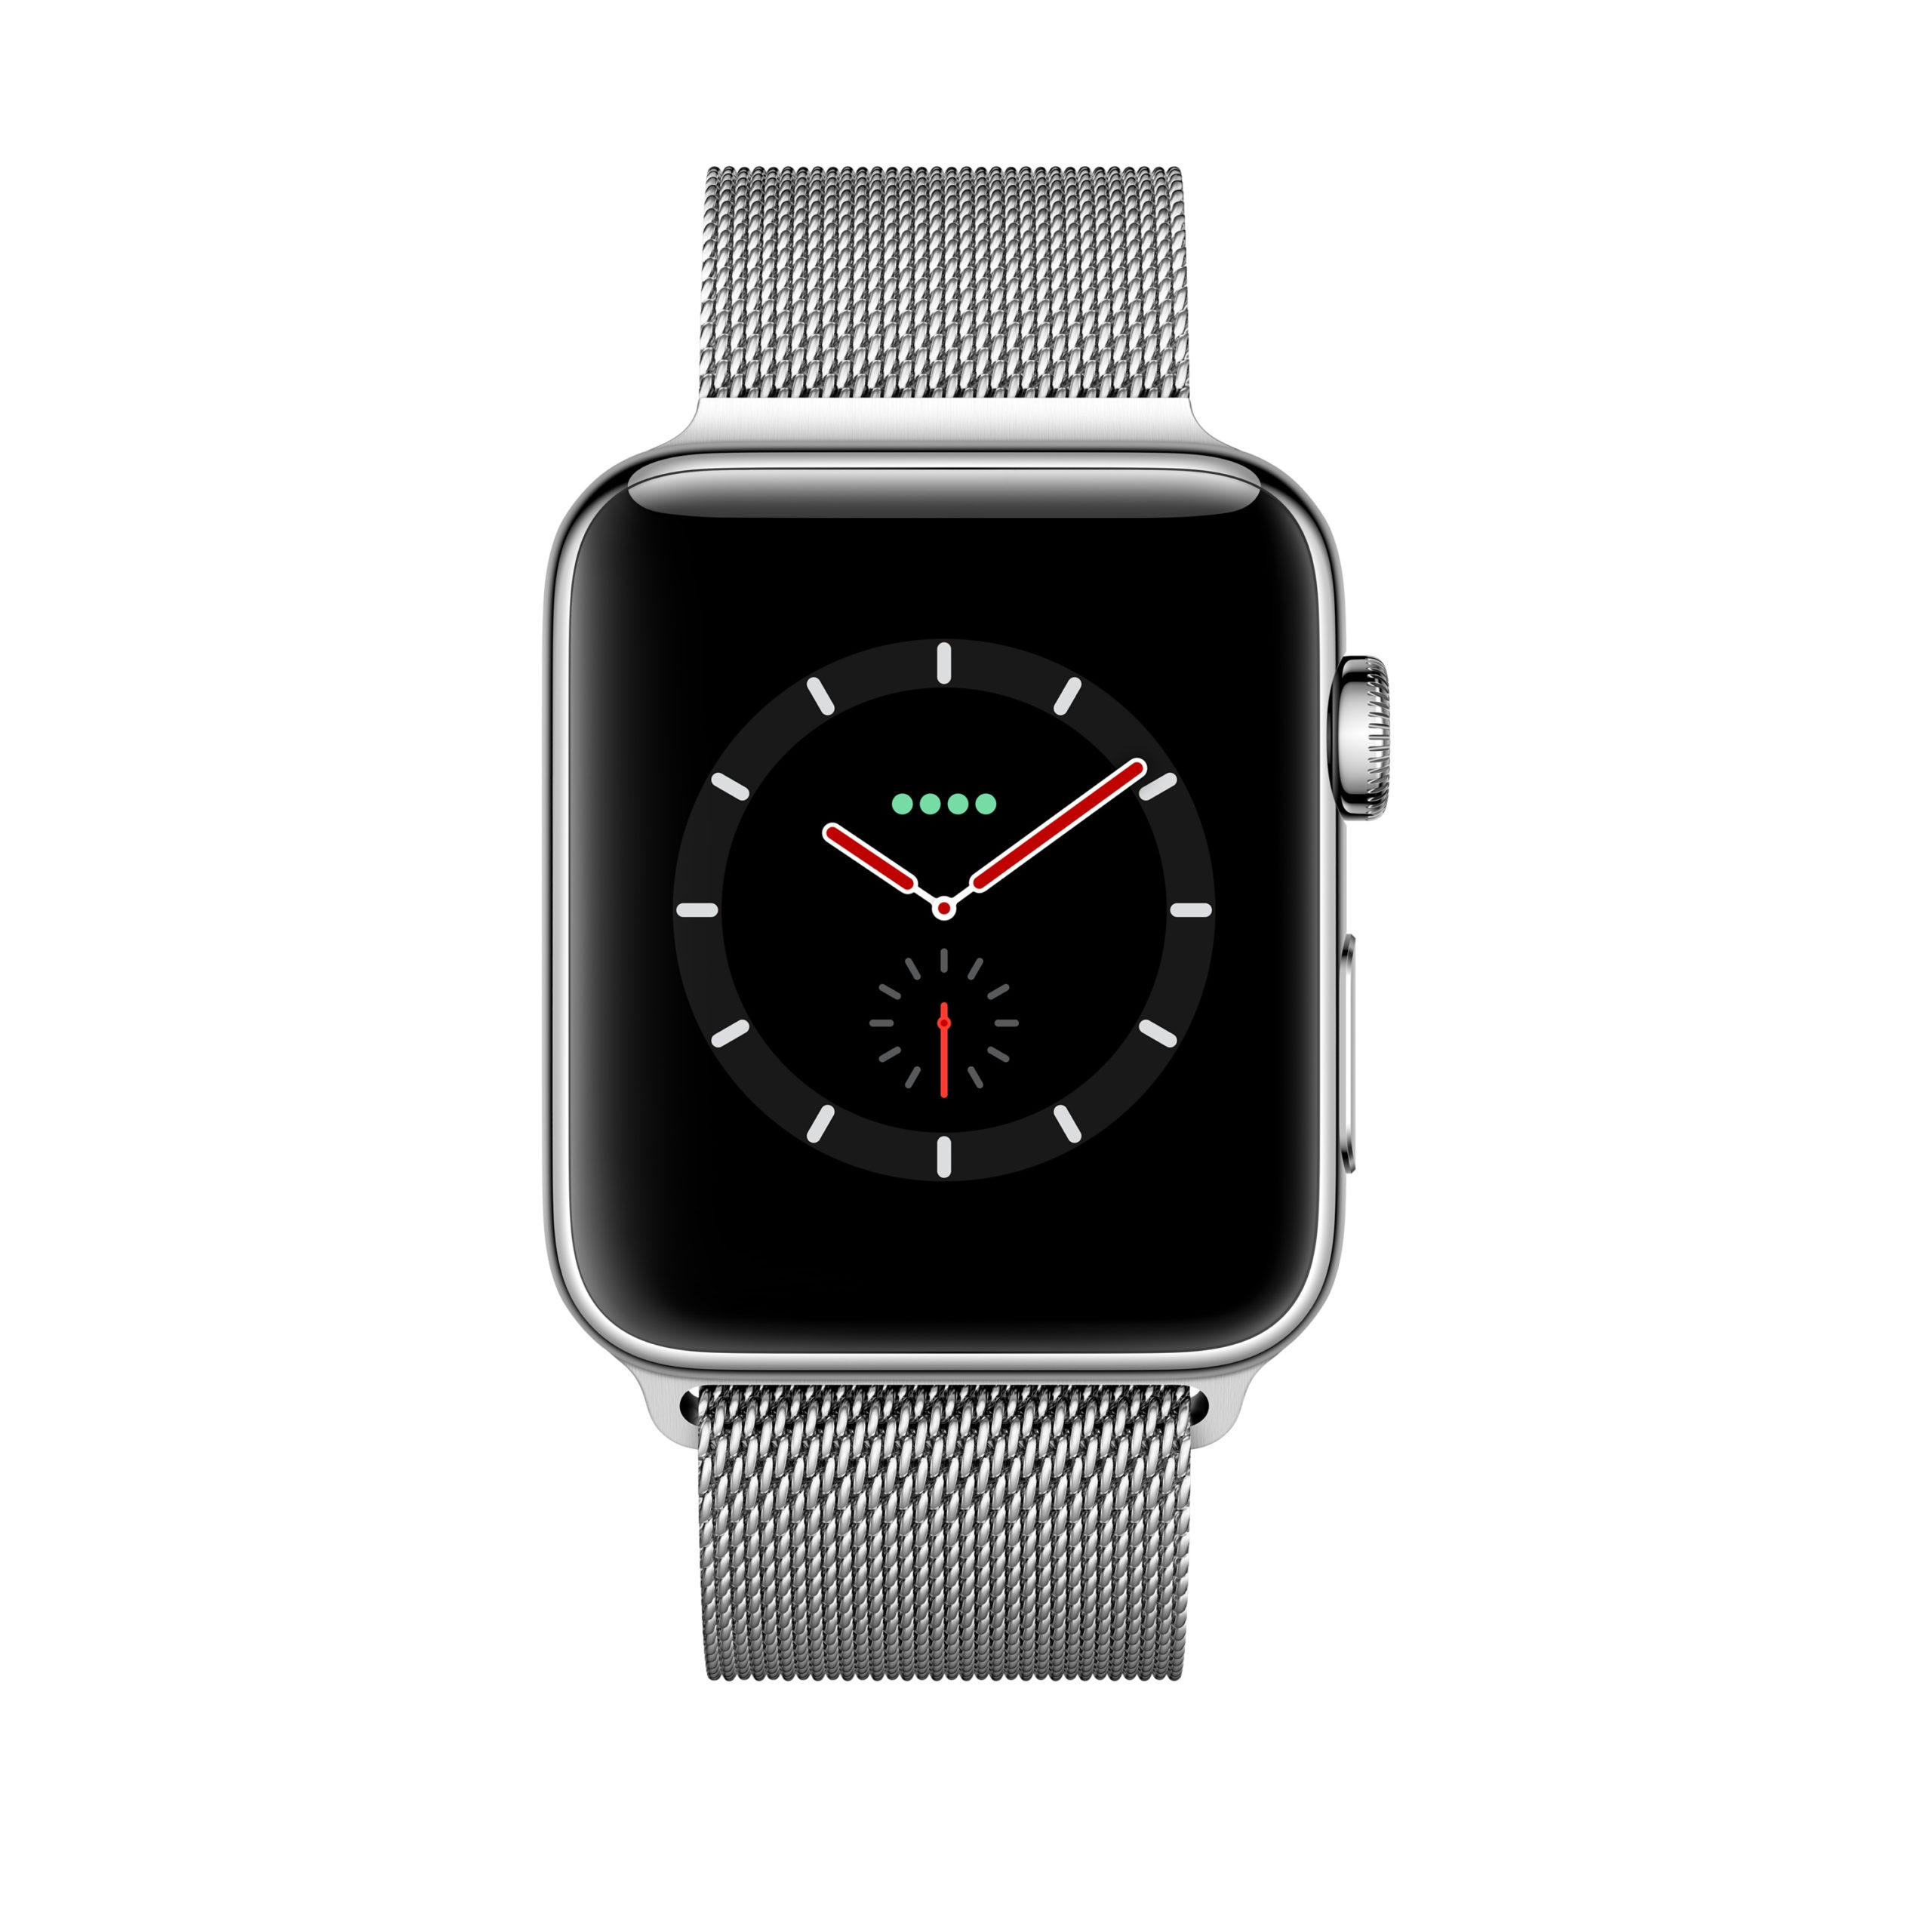 MR1F2LL/A - $169 - Apple Watch Series 3 Stainless Steel Case with ...